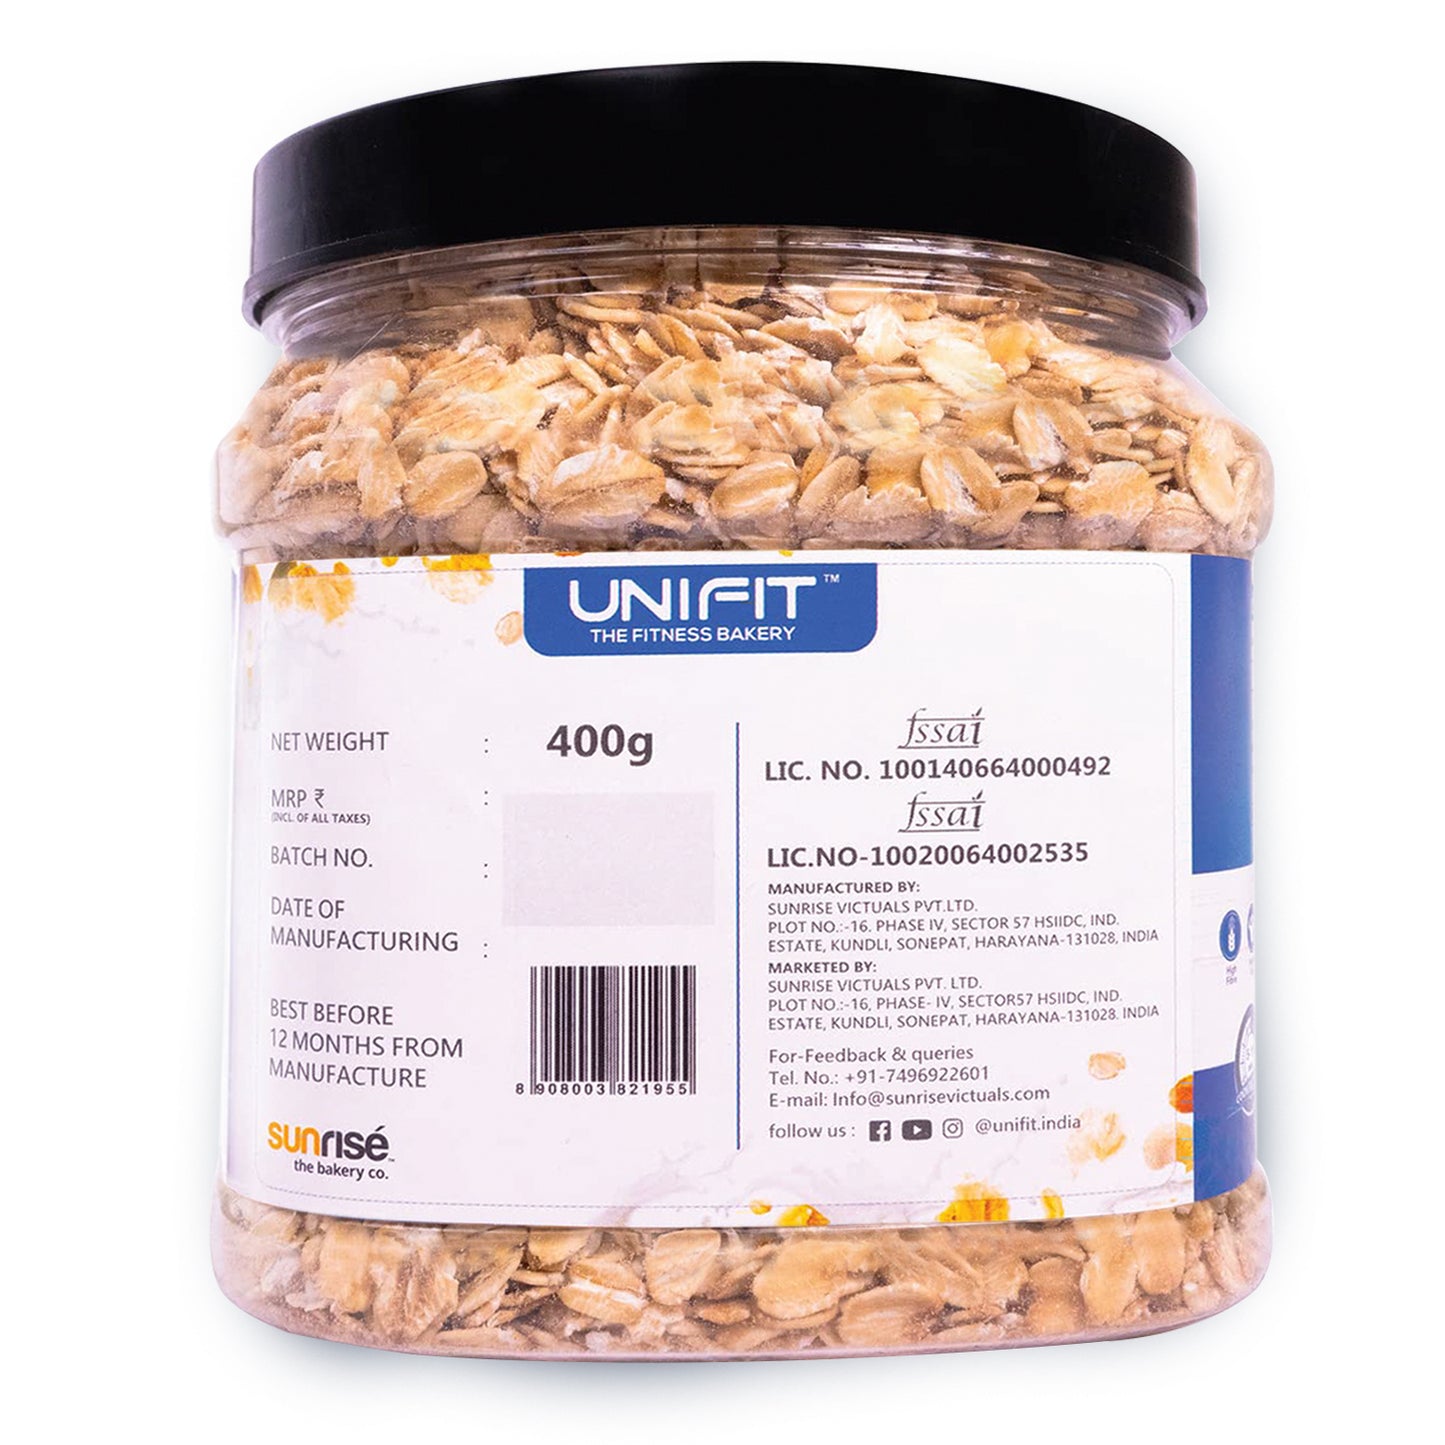 UNIFIT Rolled Oats 400g